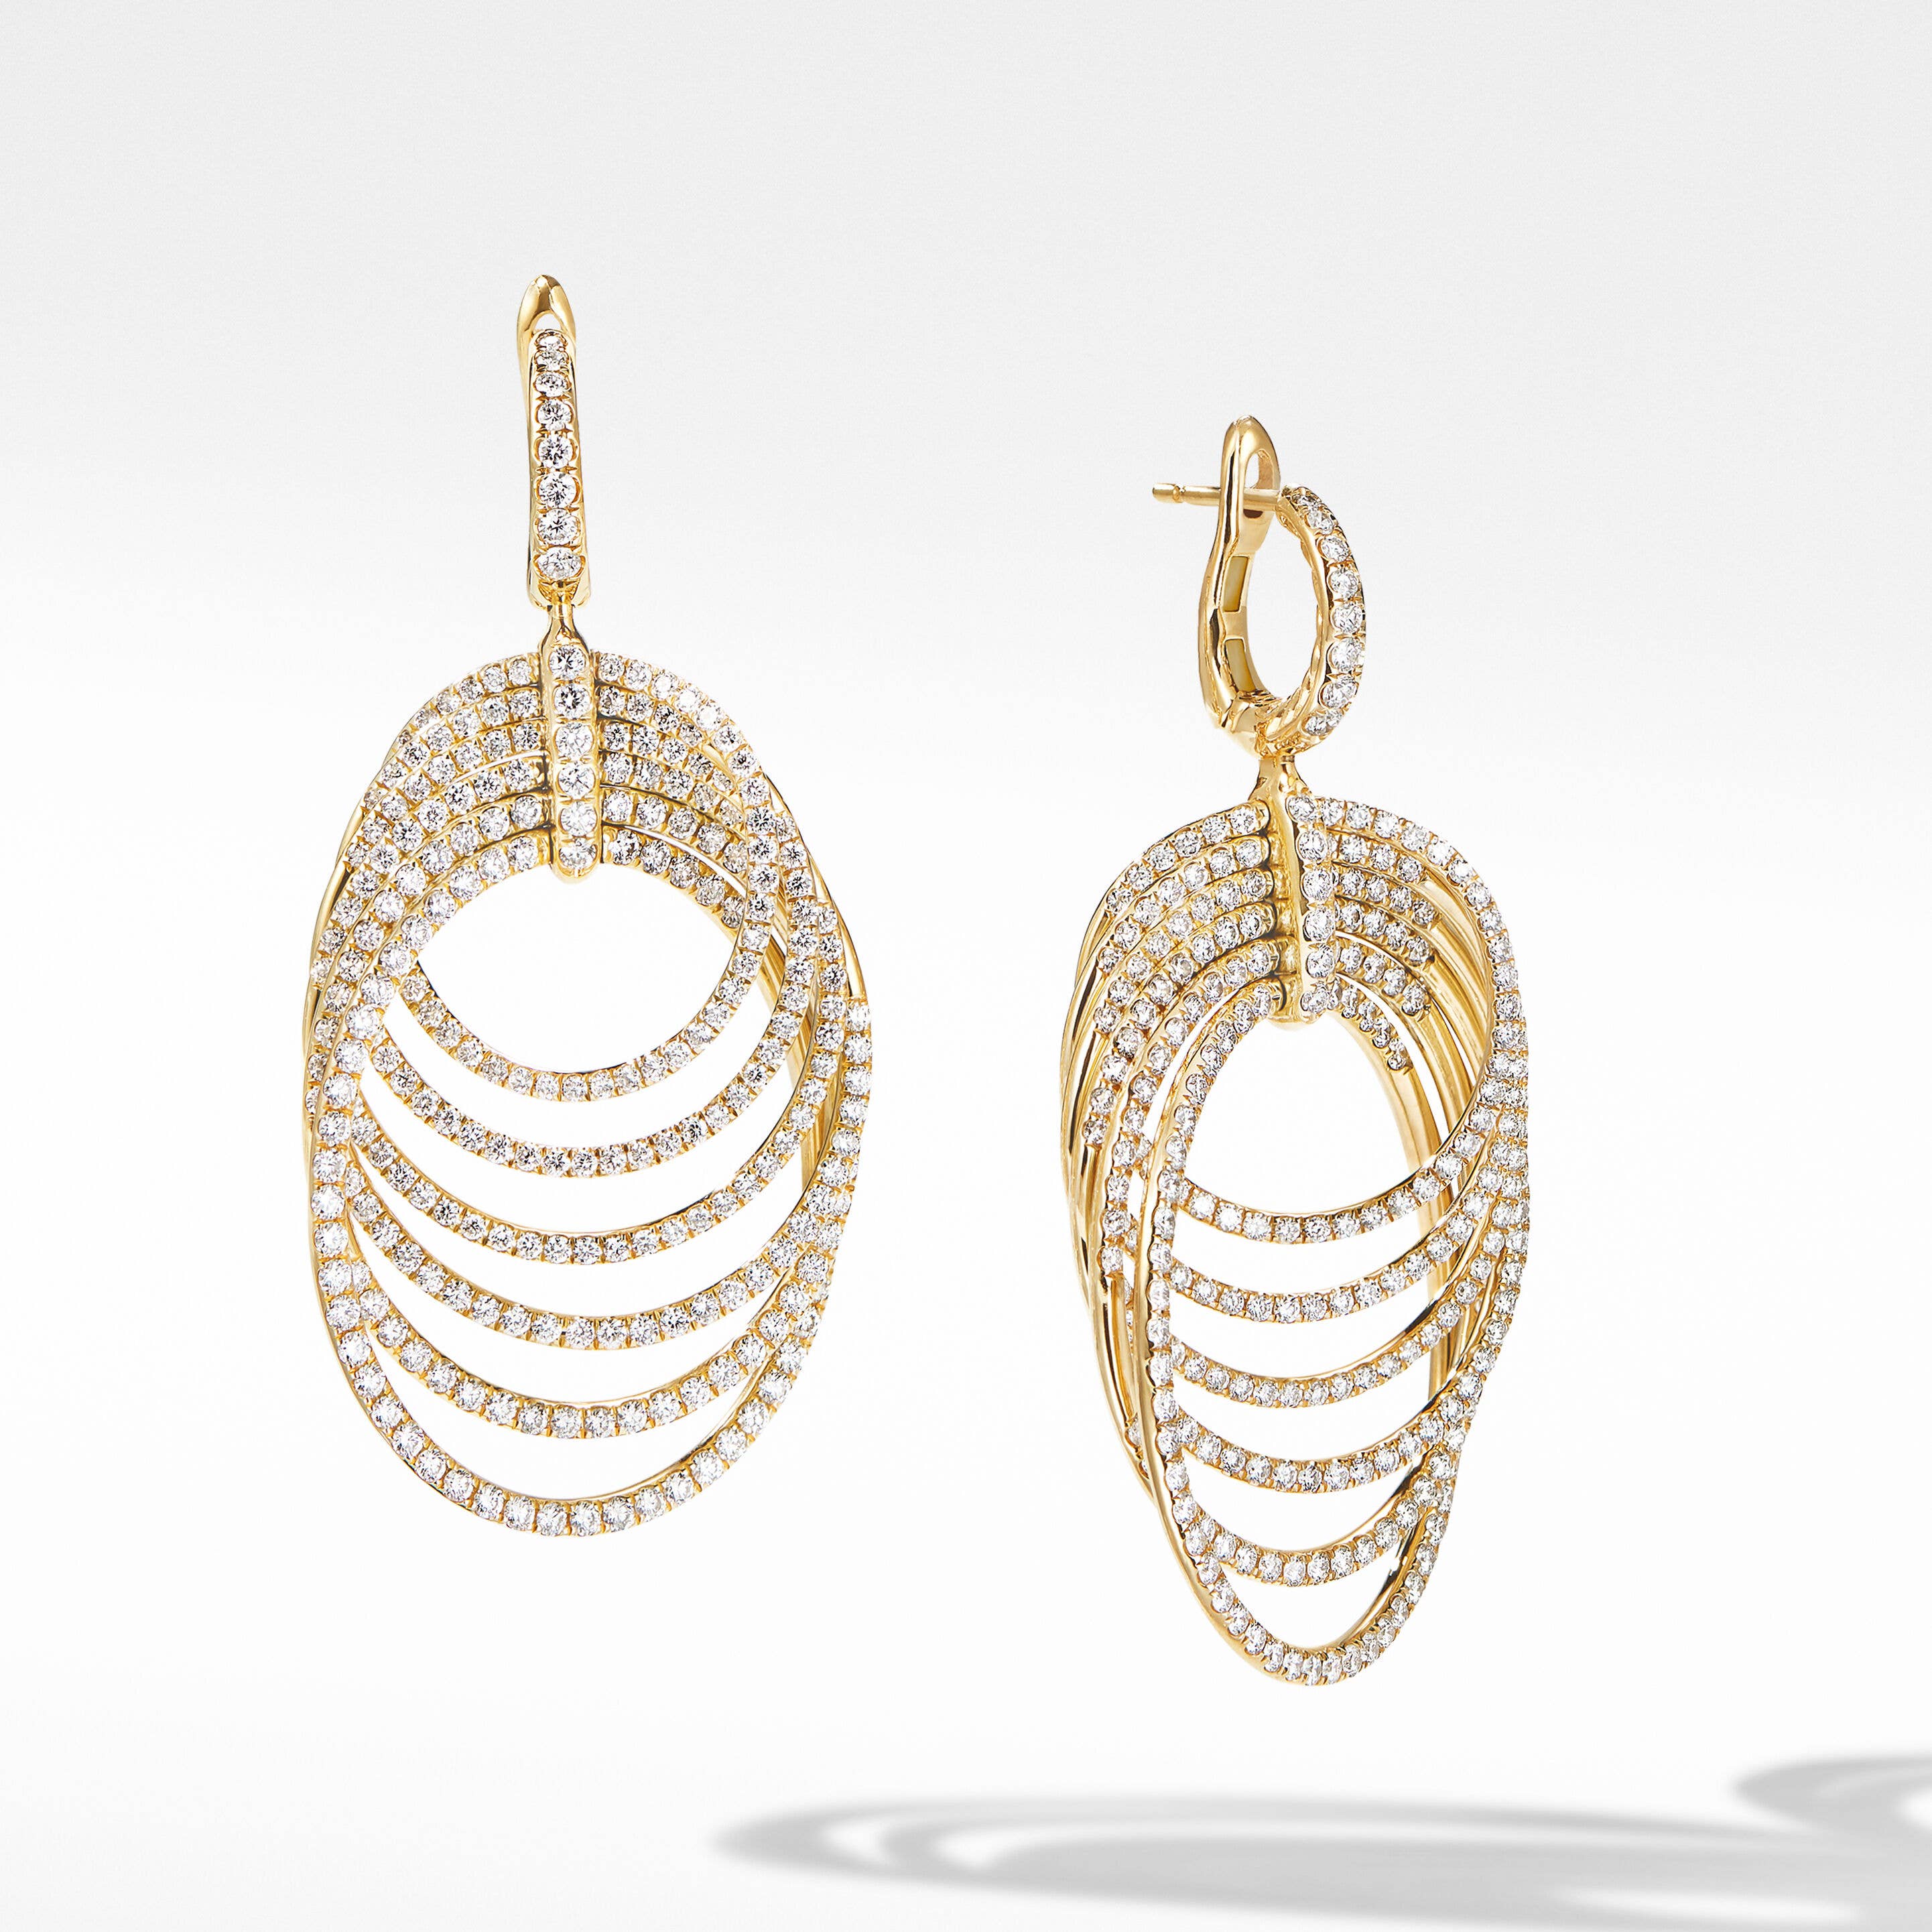 DY Origami Drop Earrings in 18K Yellow Gold with Full Pavé Diamonds